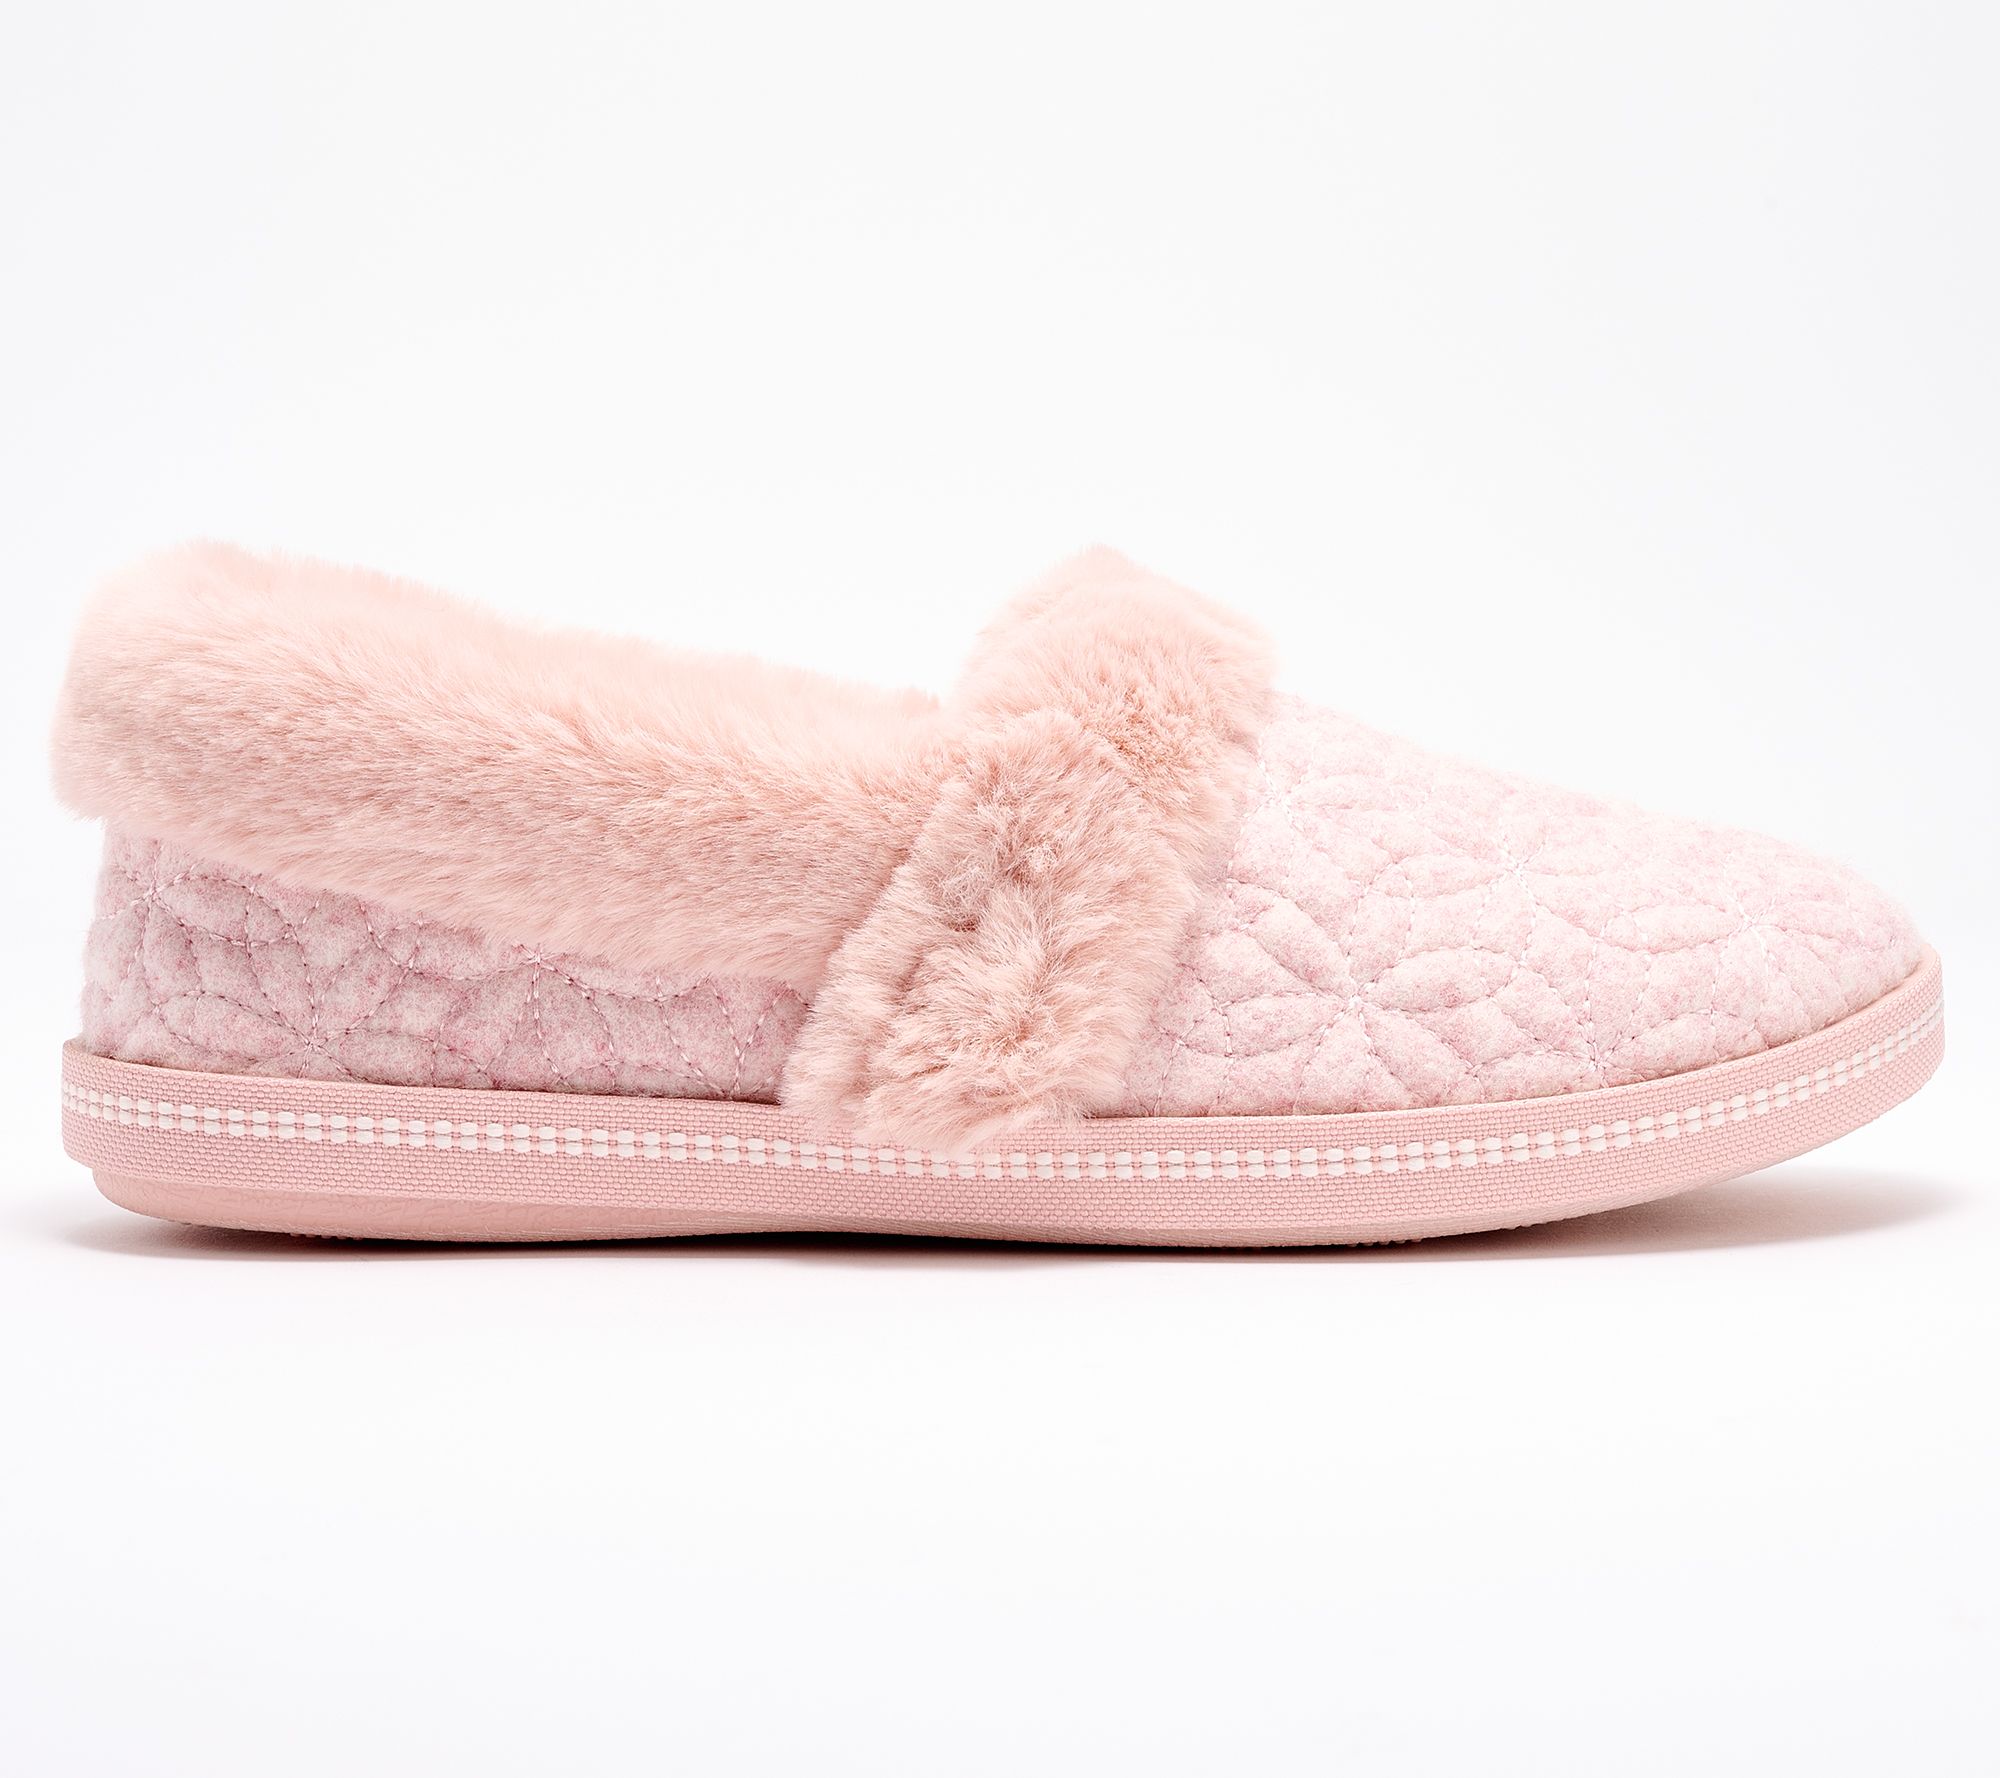 Skechers Cozy Campfire Floral Quilted Slipper -Bright Blossom - QVC.com